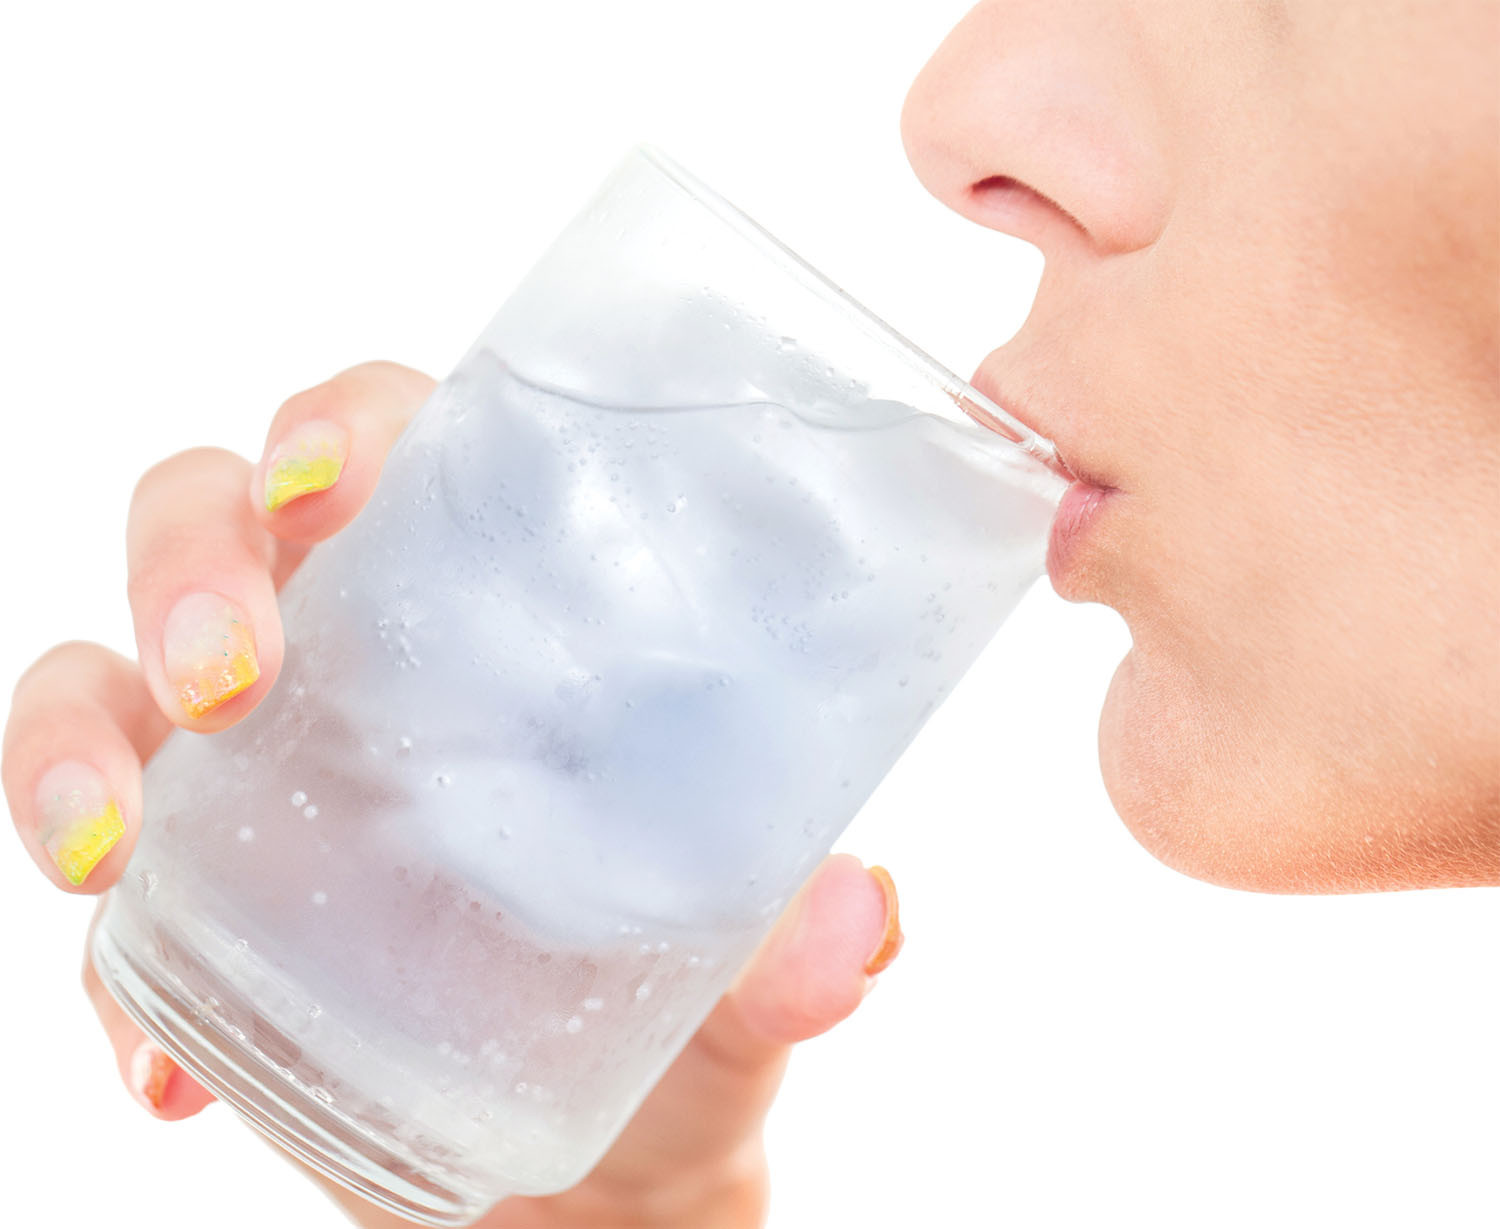 close-up photo of a woman drinking ice water from a glass